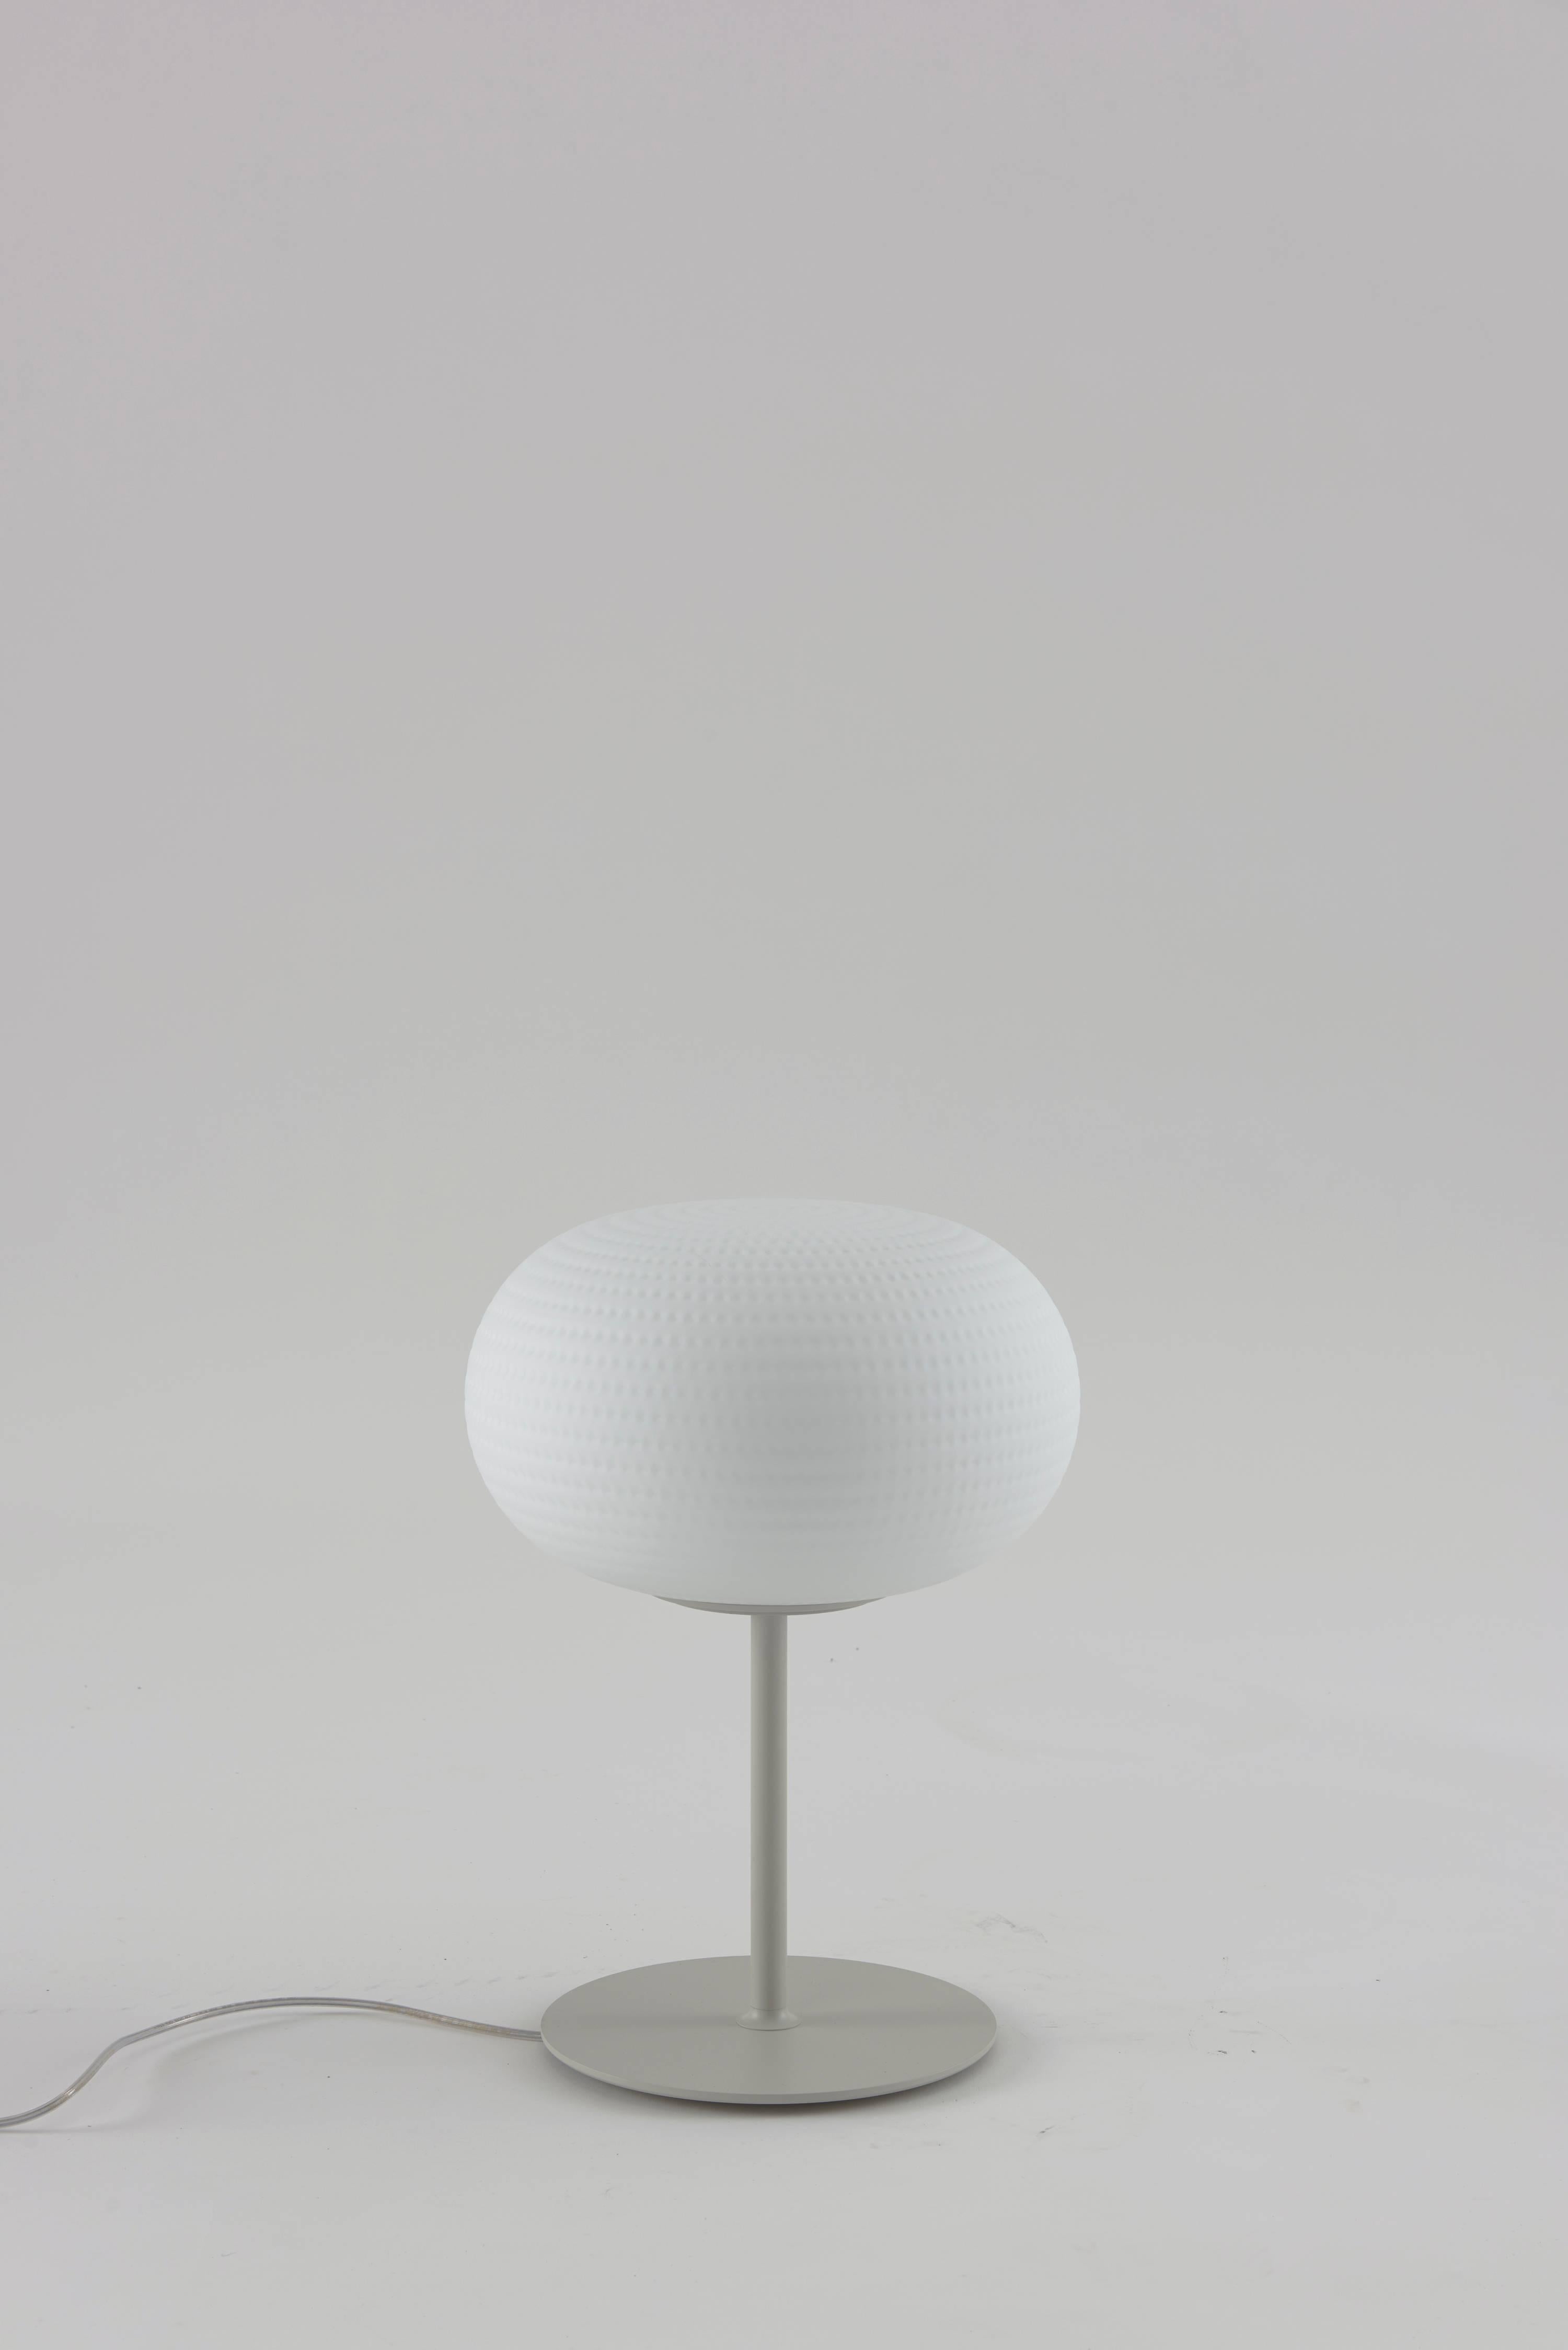 Bianca large table lamp with stem by Matti Klenell from Fontana Arte.

Its beautifully balanced shape is enriched and made unique by an orderly series of delicate, light grooves that, on the white volume of the glass, look like tiny prints on